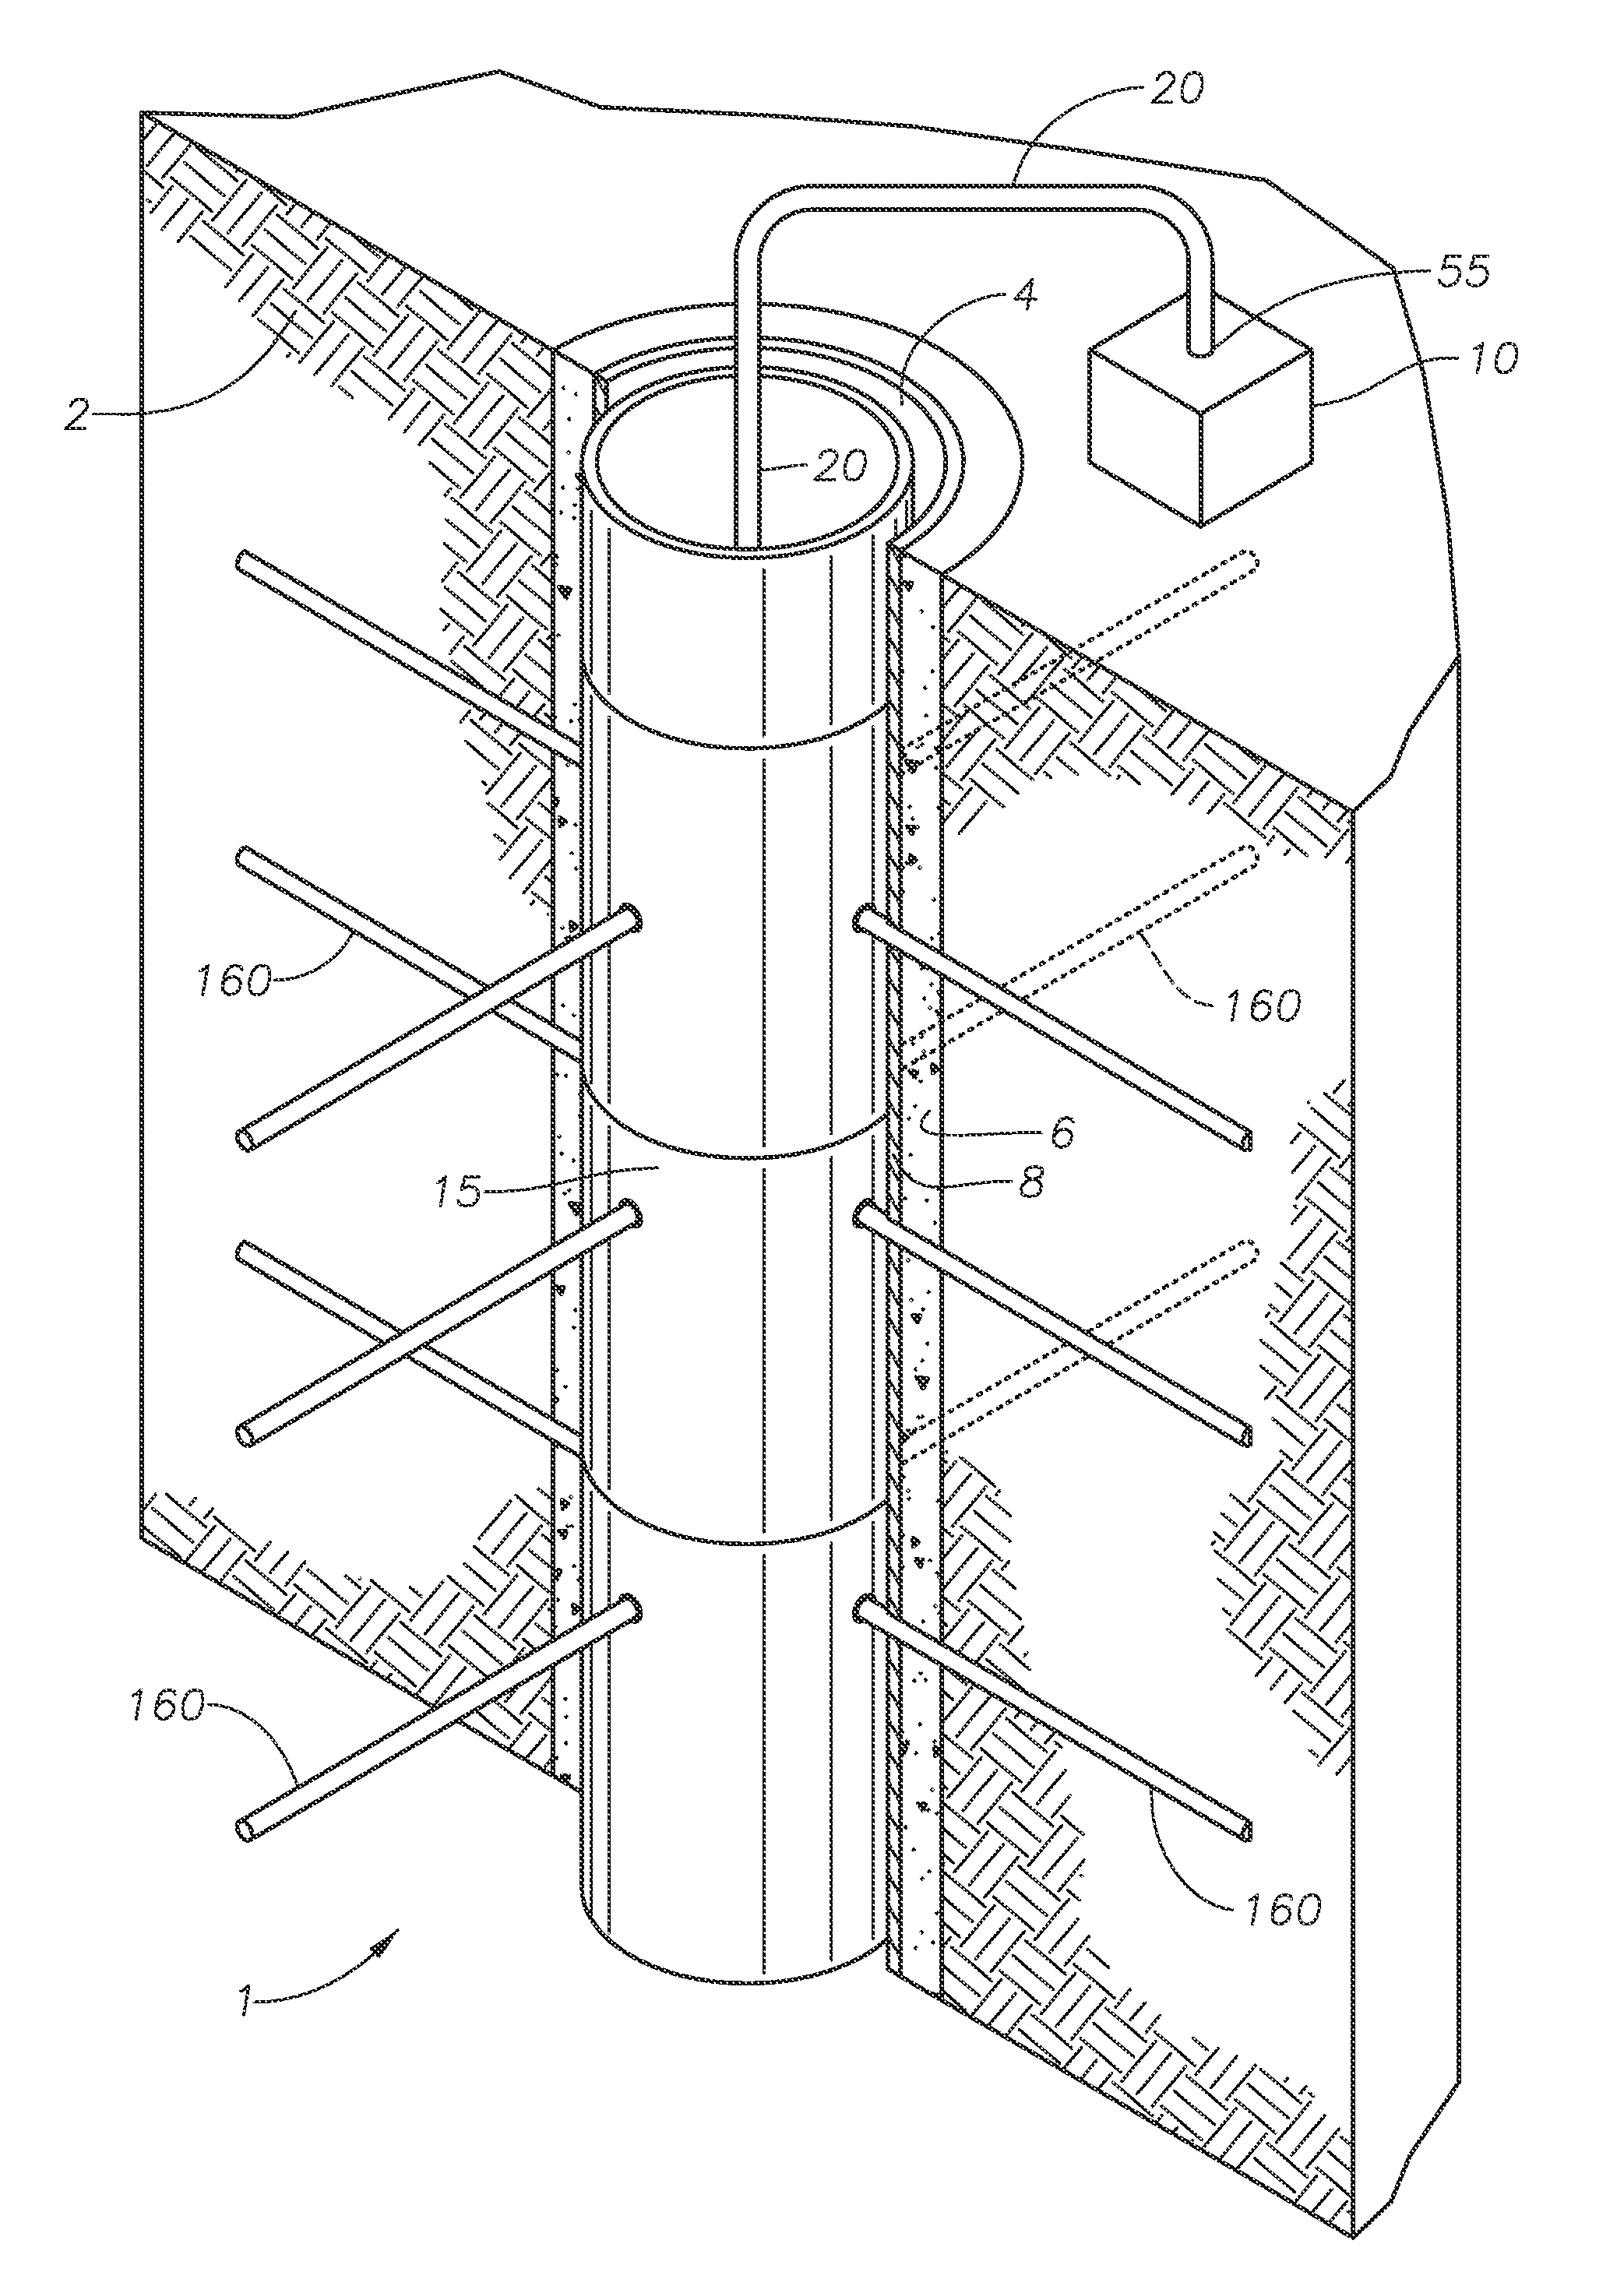 Downhole deep tunneling tool and method using high power laser beam